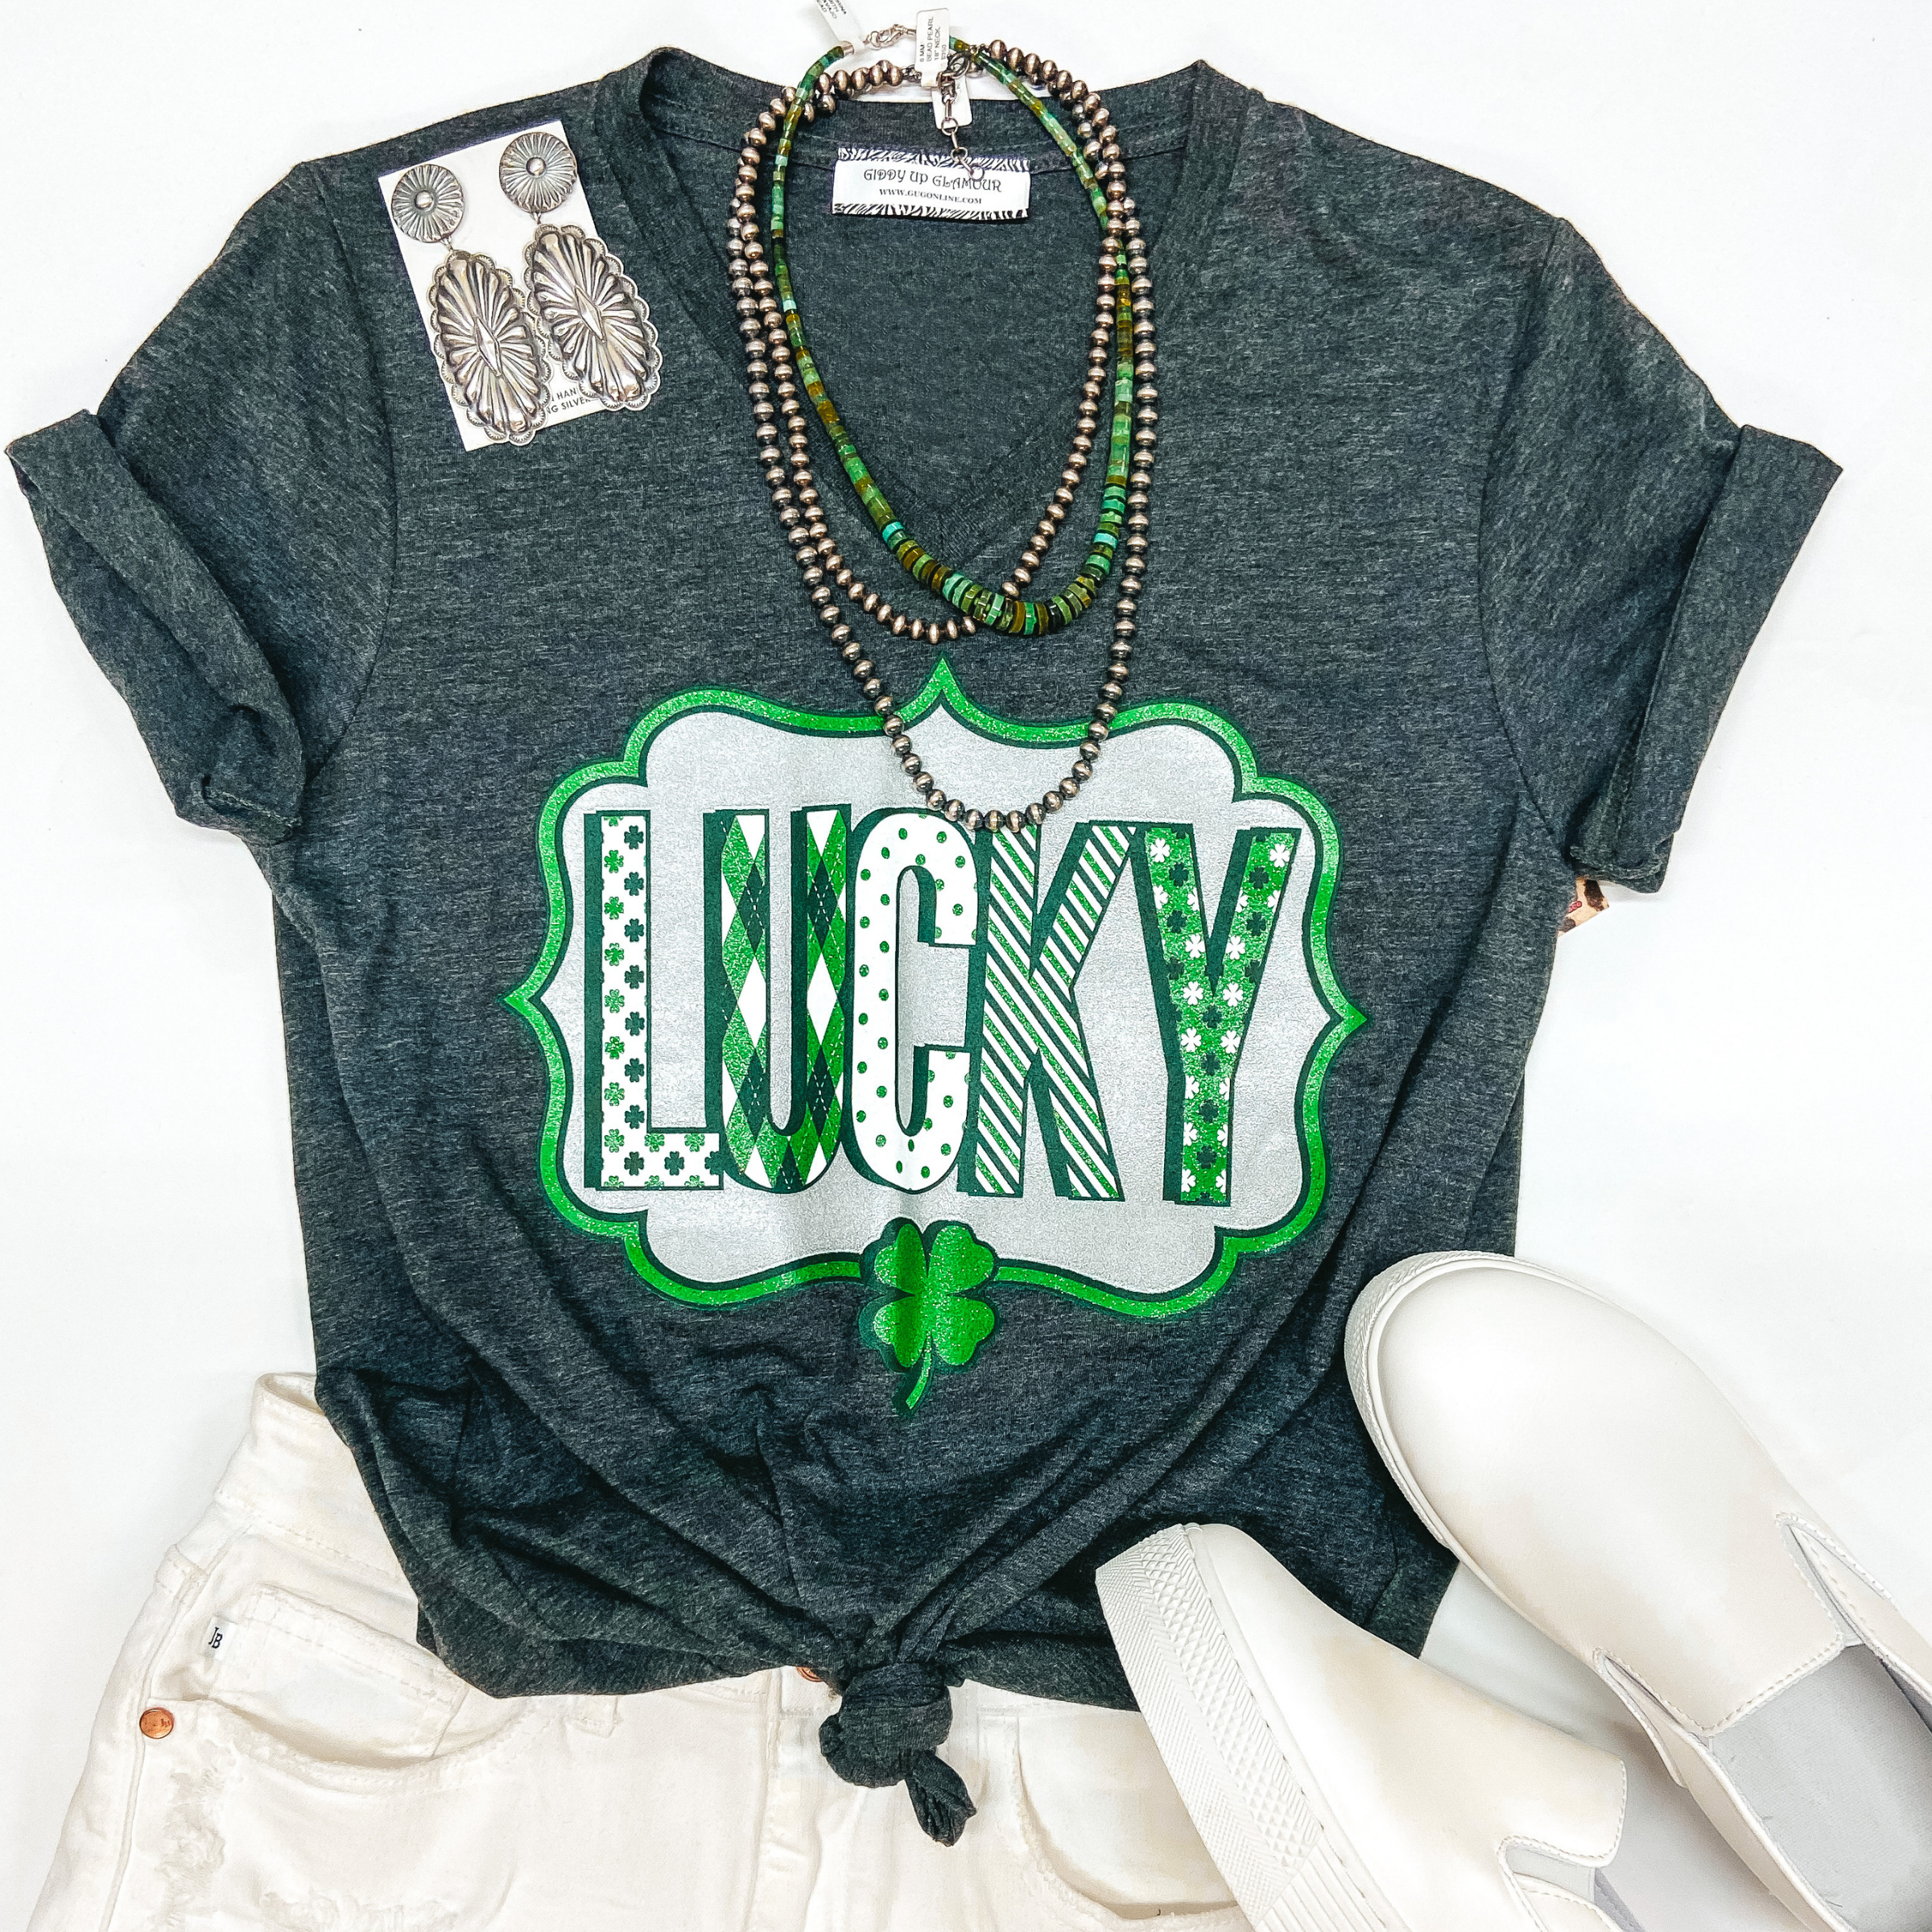 A grey v neck tee shirt with a graphic that says "Lucky". Pictured on white background with white sneakers, white shorts, and silver jewelry.